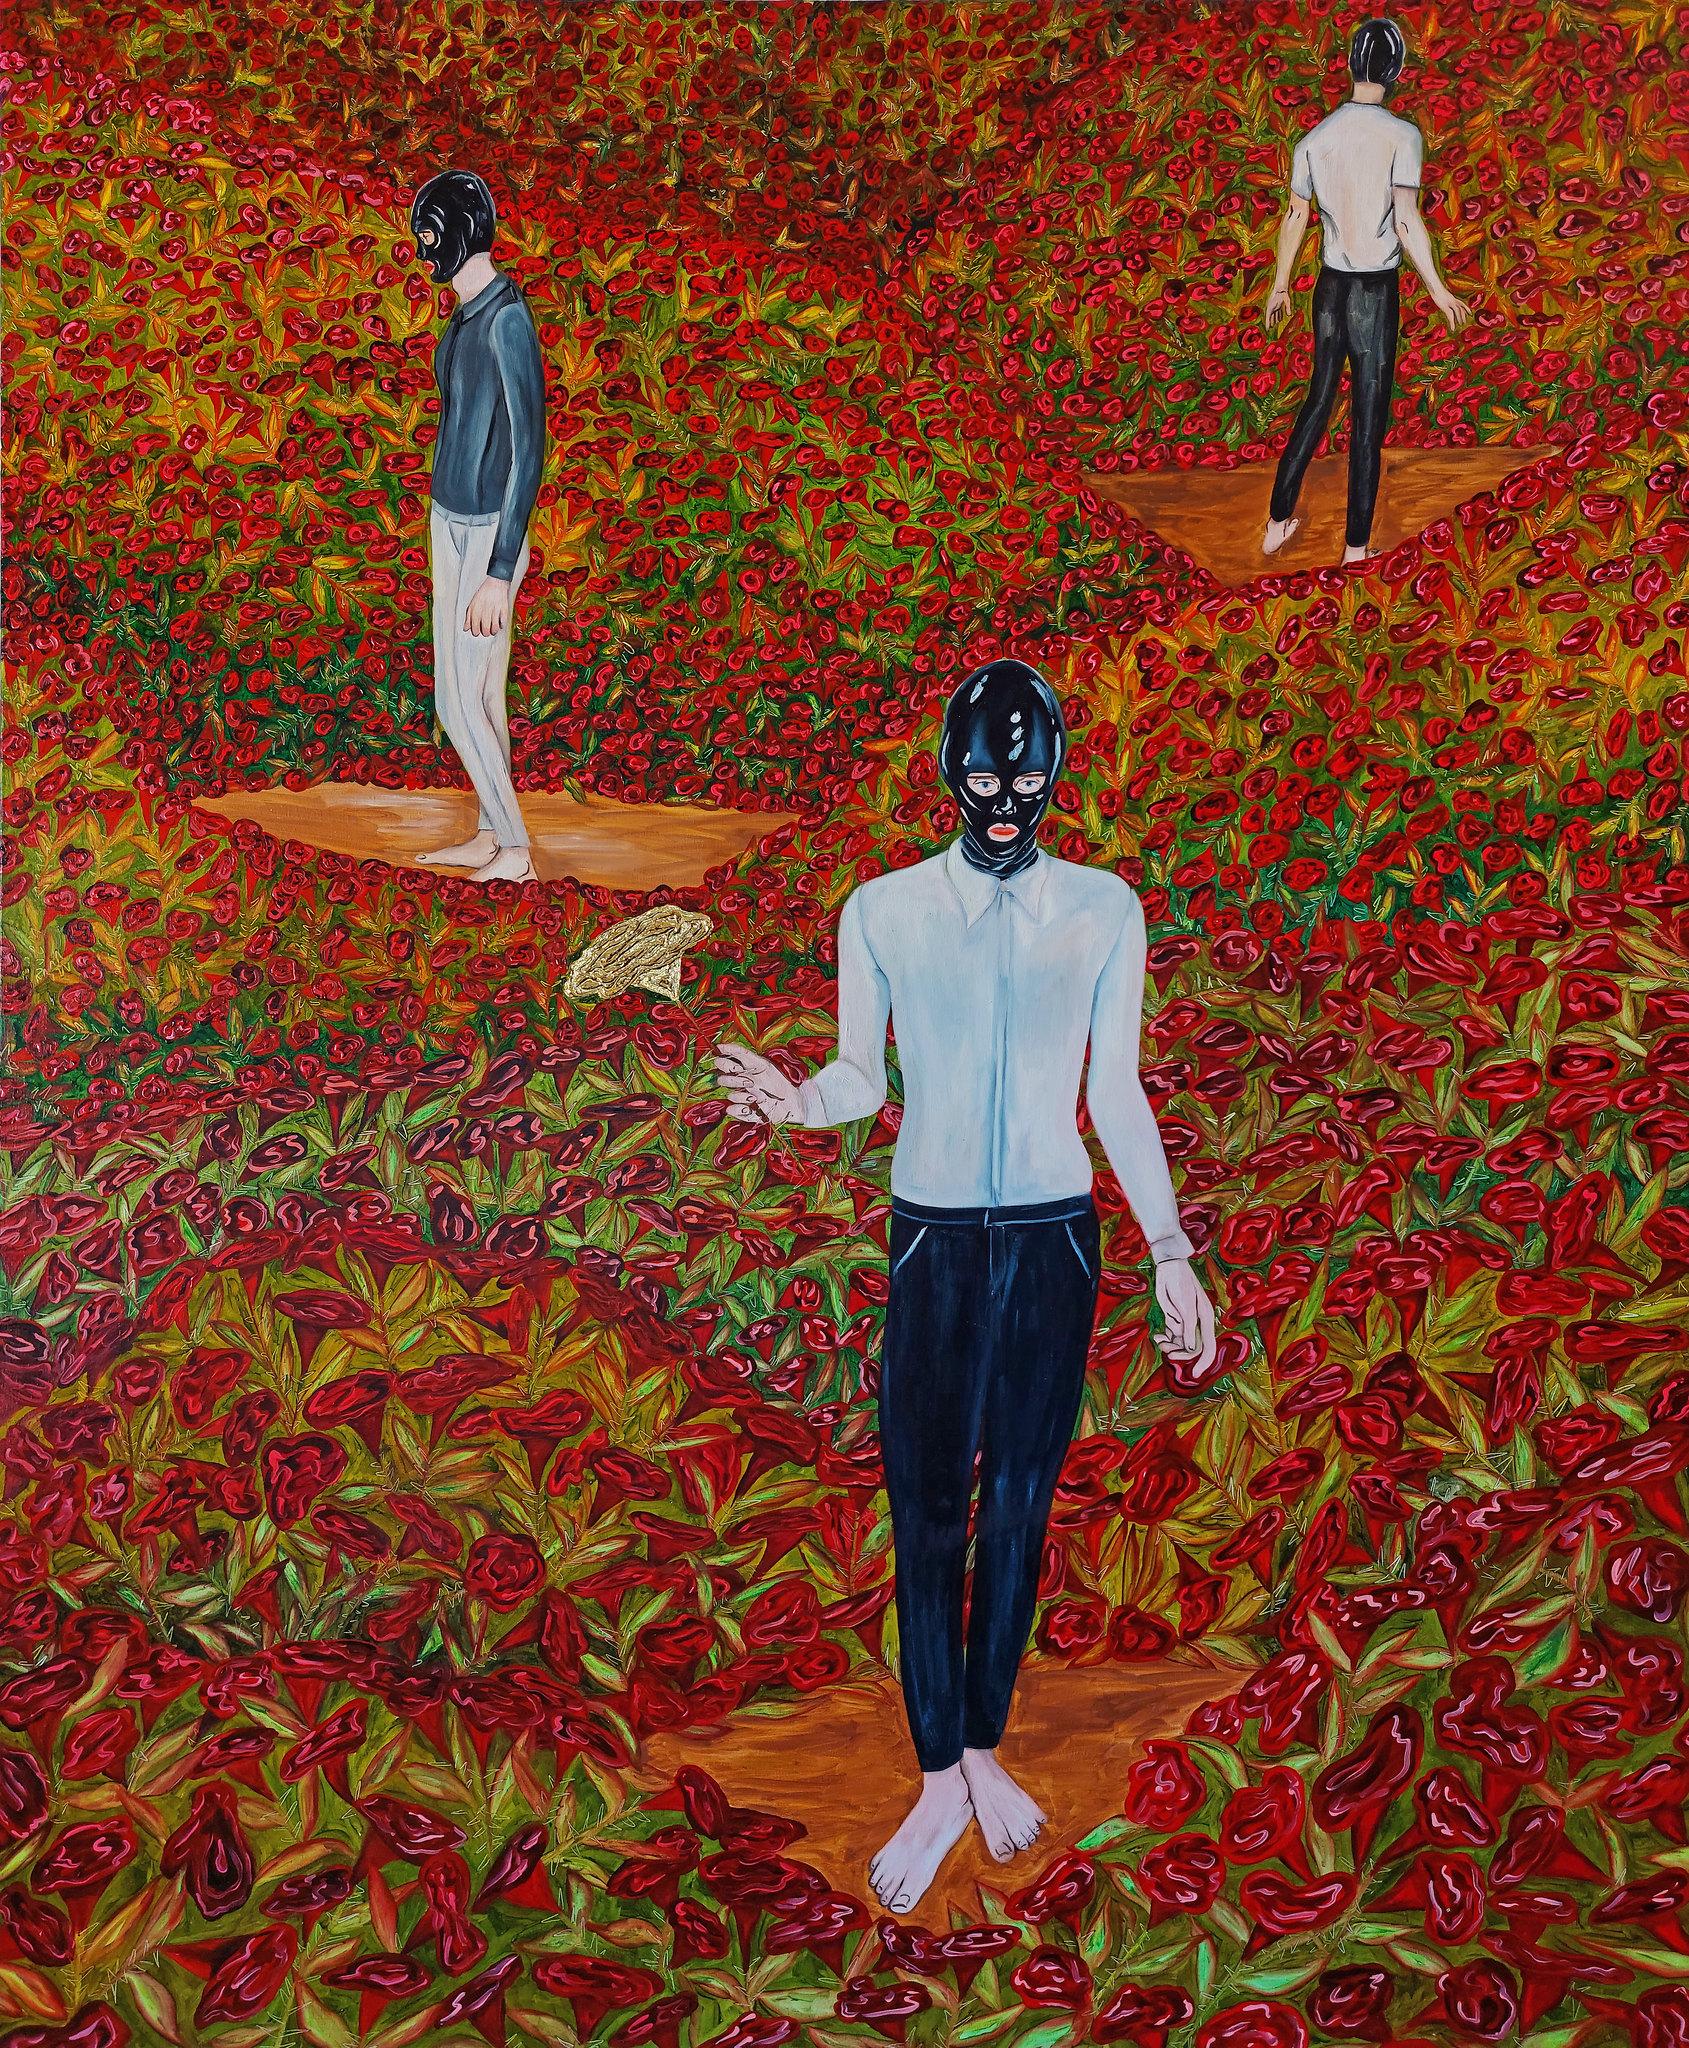 The desire to take refuge in oblivion and frivolity arises, but the path is full of surprises, 2023 by Ramonn Vieitez
Oil and gold leaf on canvas
Size: 47.2 H x 39.3 W in.
Unique
Signed on the back by the artist

___

Ramonn Vieitez is a self-taught